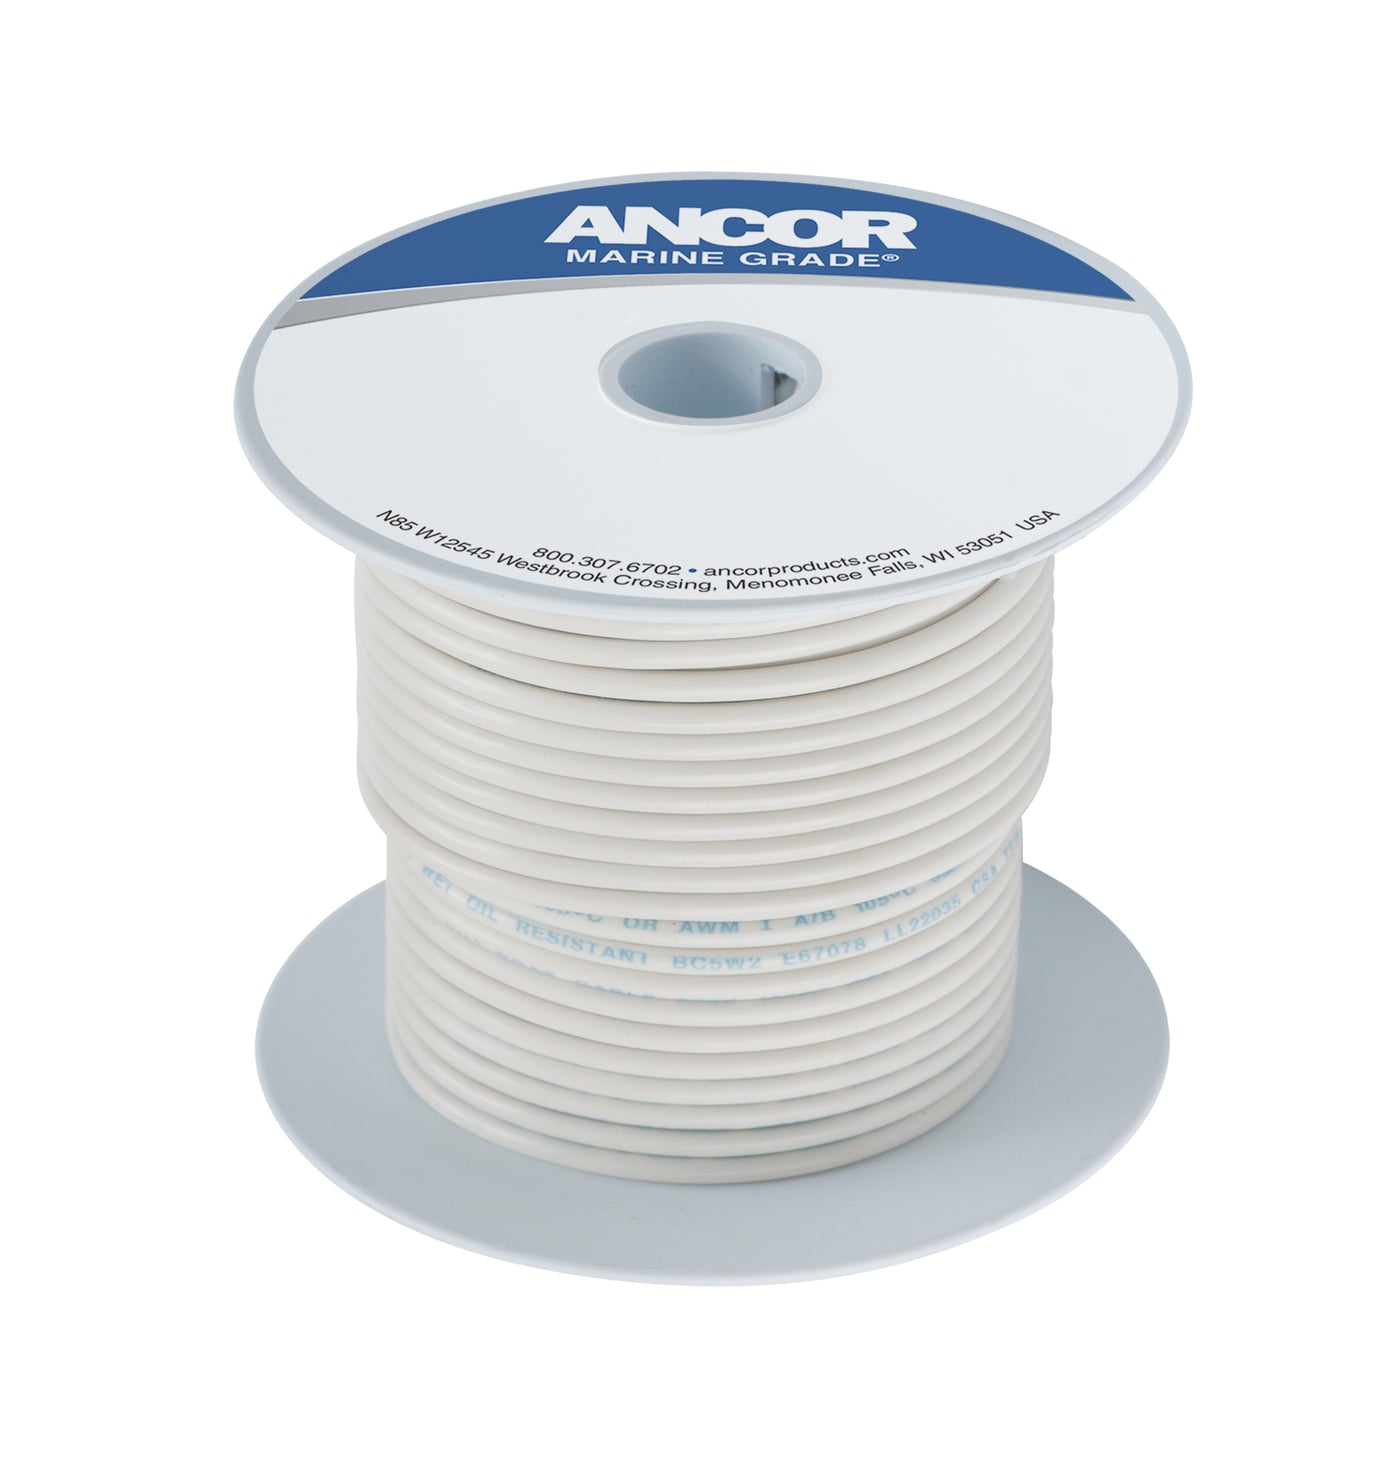 Ancor 112725 Tinned Copper Wire, 6 AWG (13mm²), White - 250ft